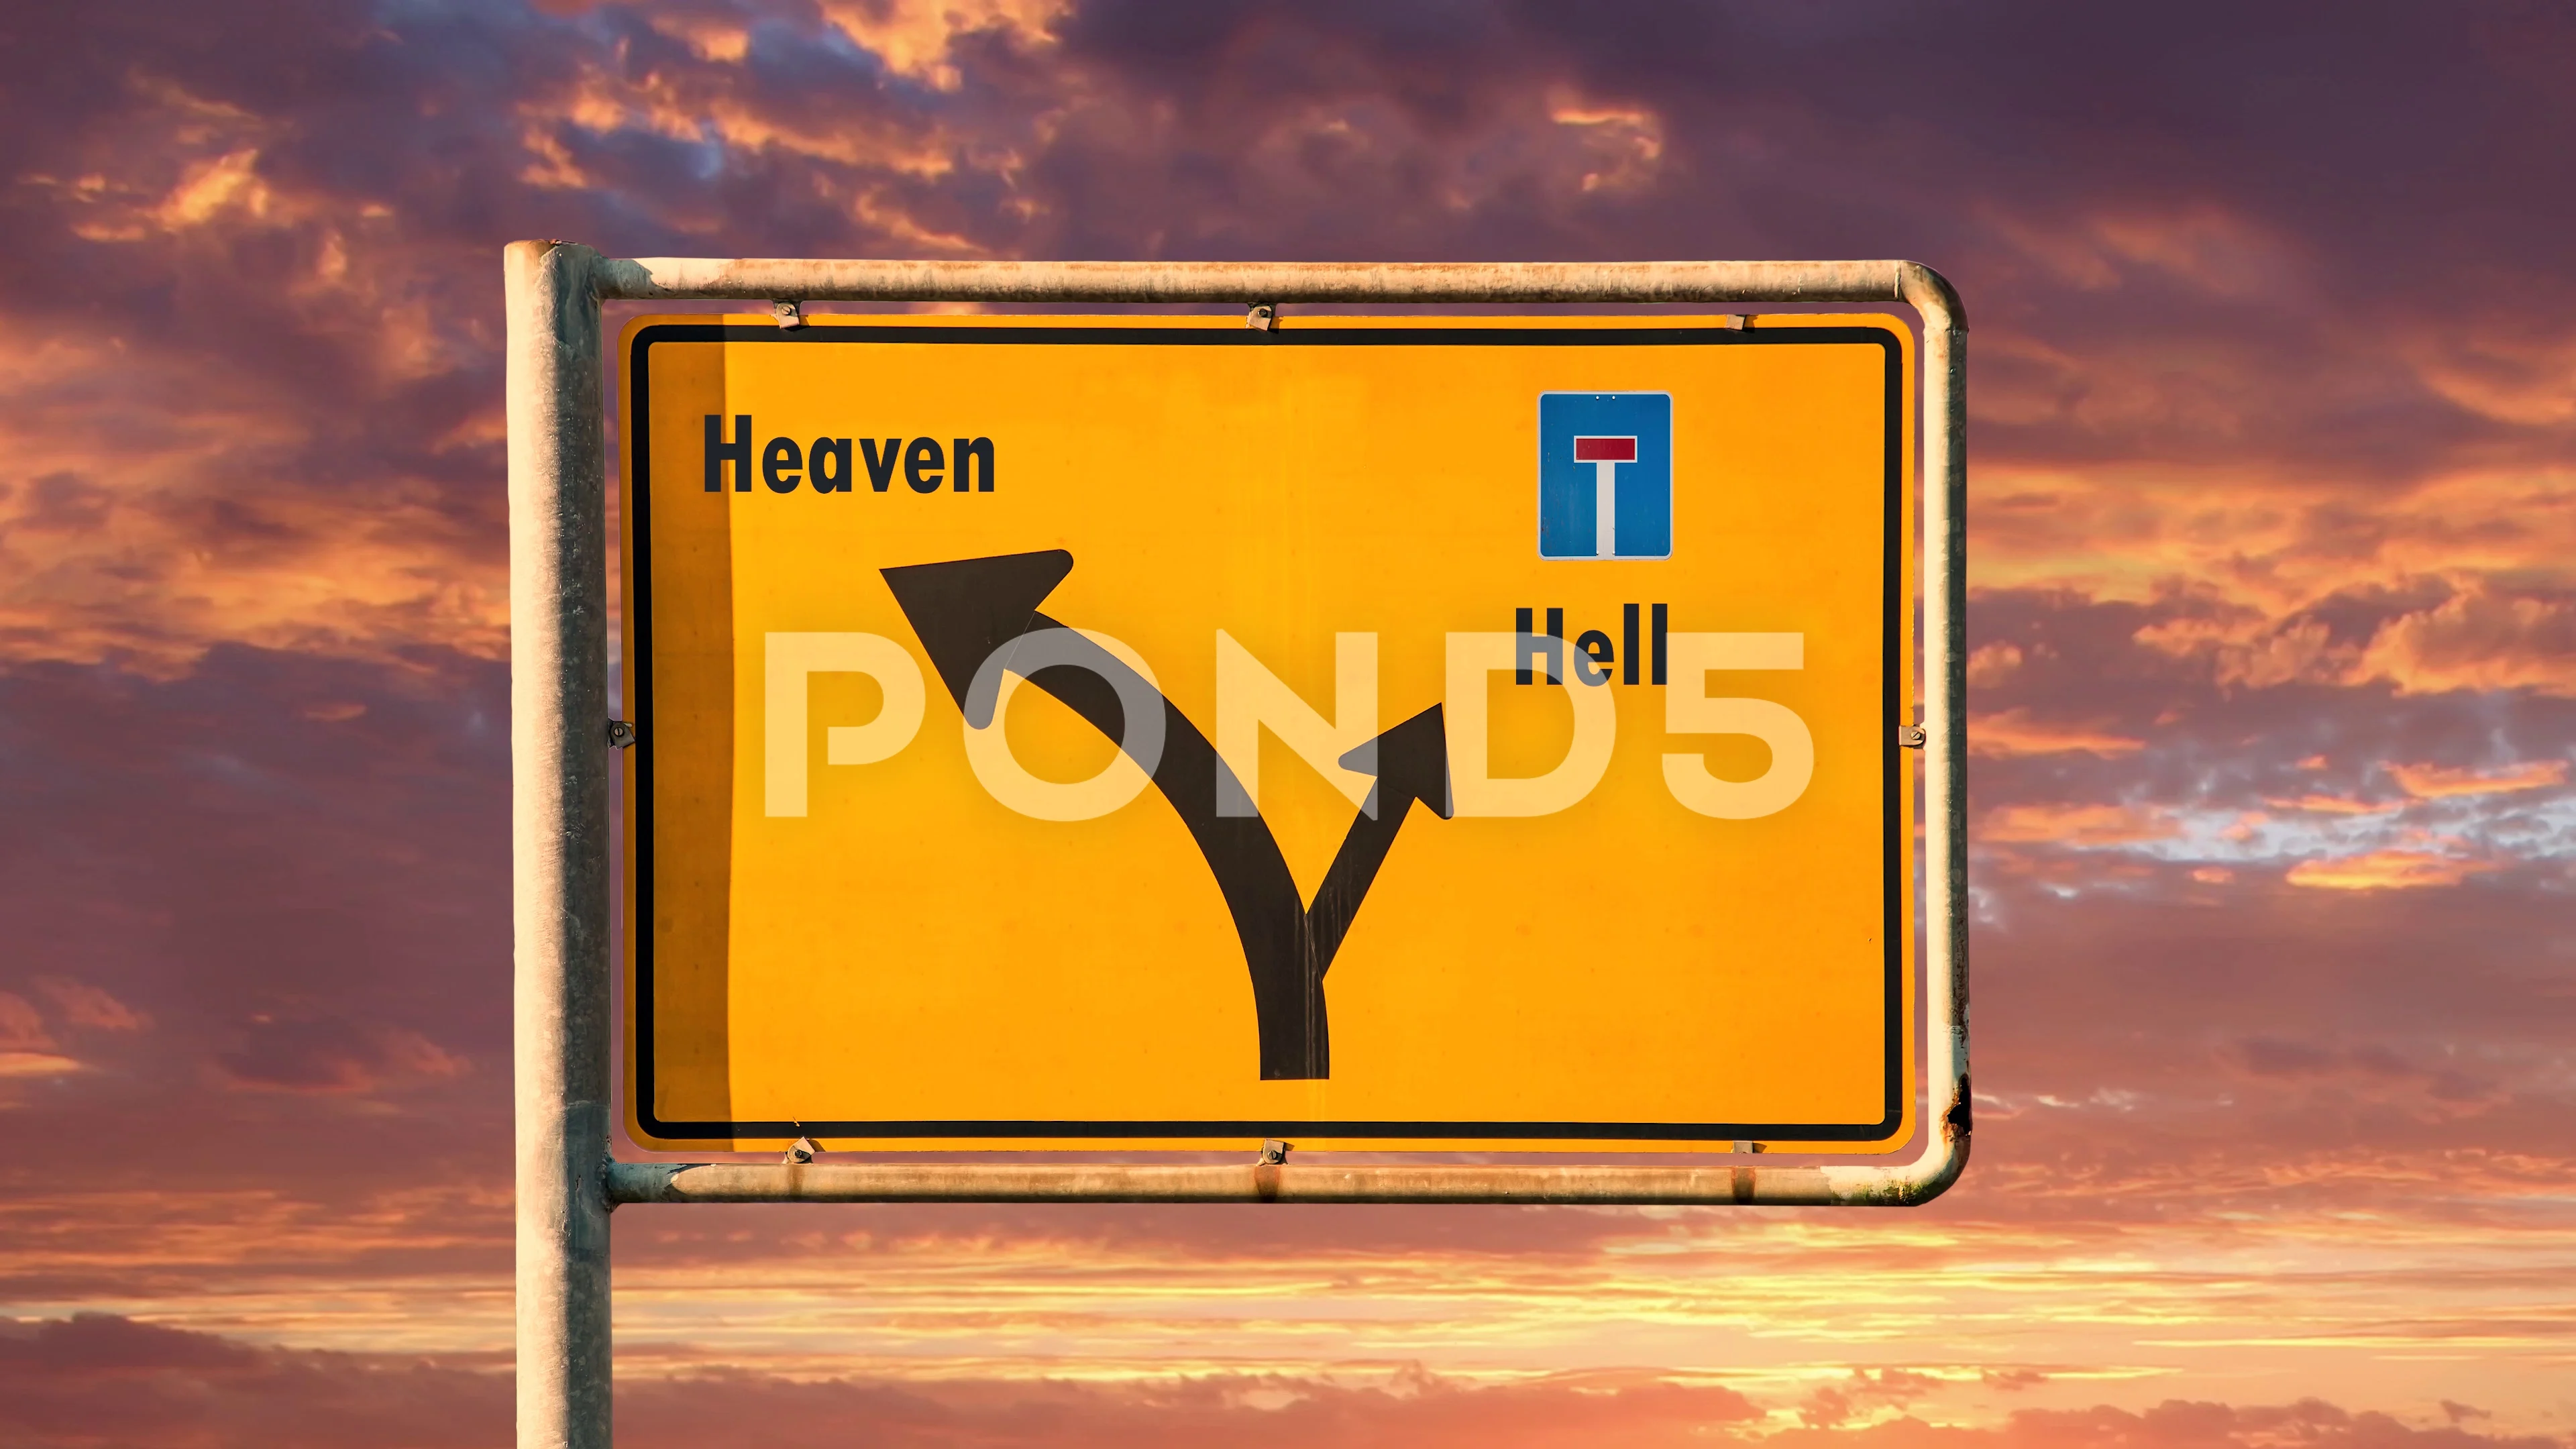 heaven and hell sign